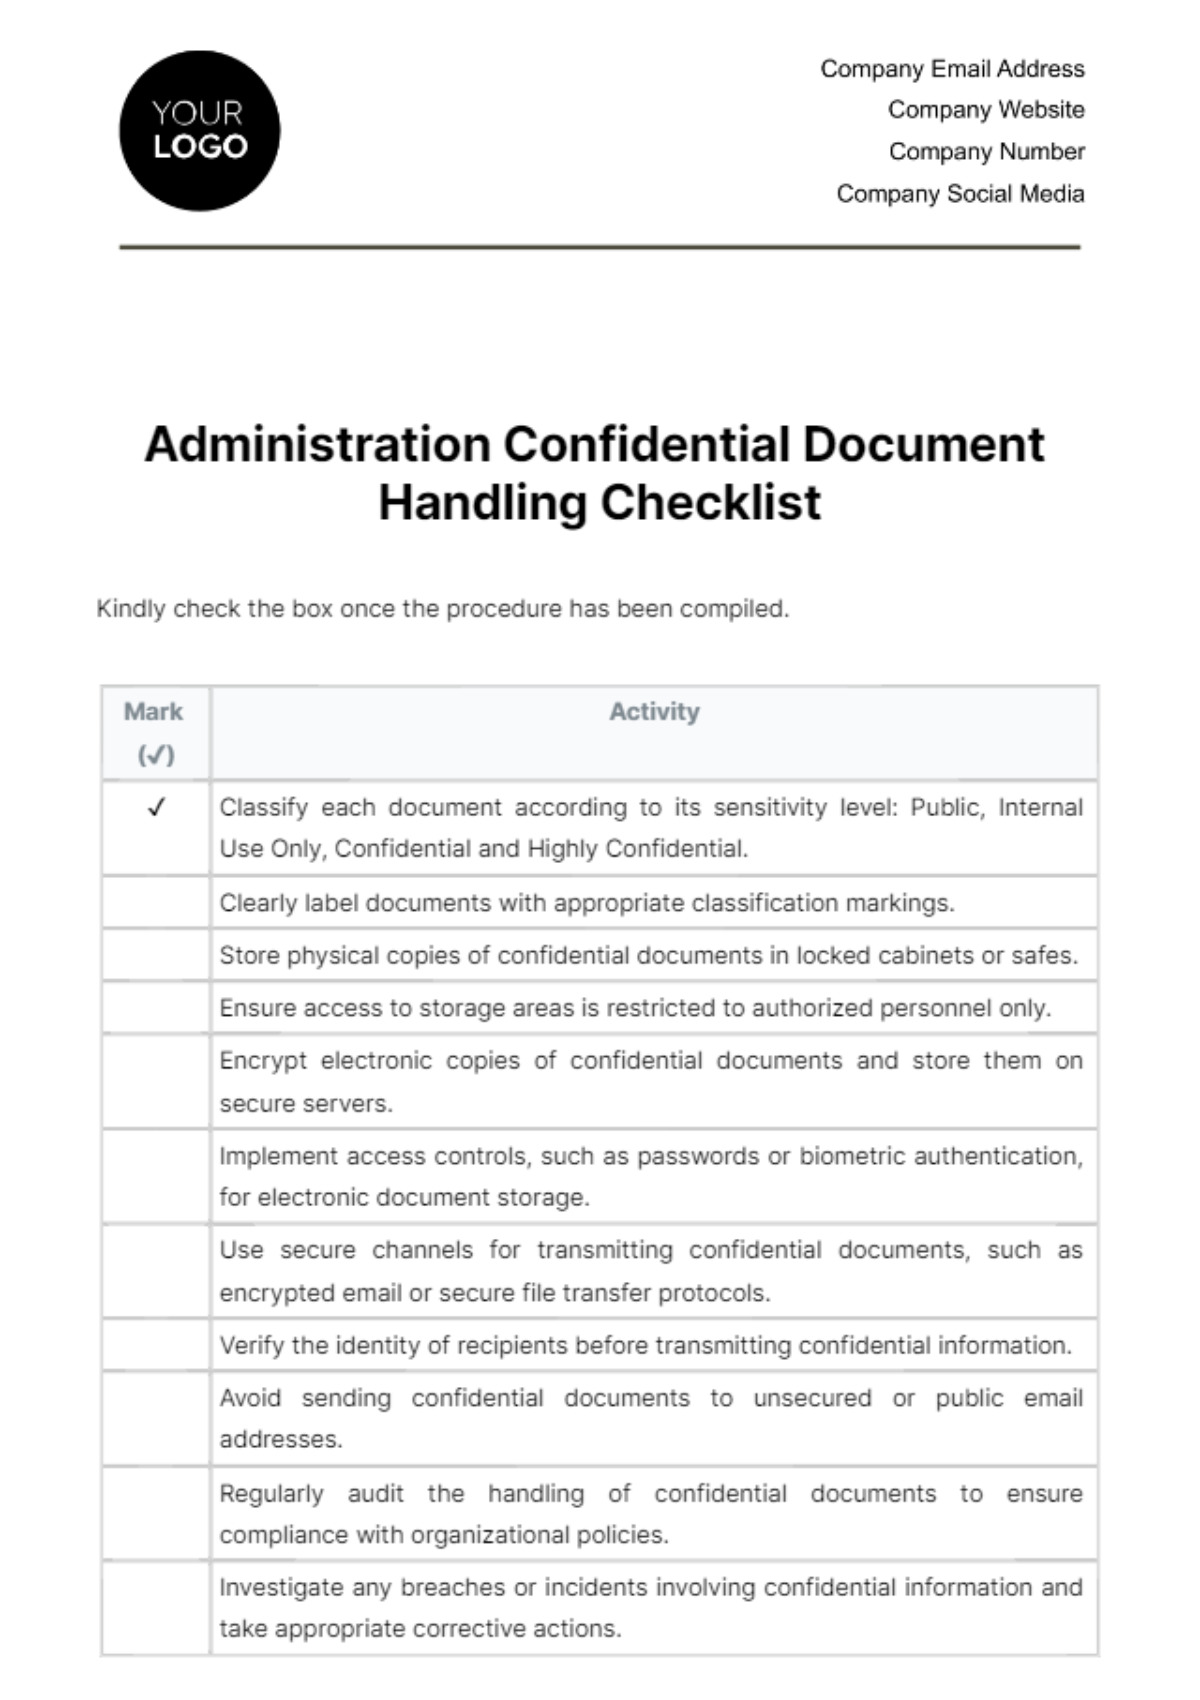 Free Administration Confidential Document Handling Checklist Template